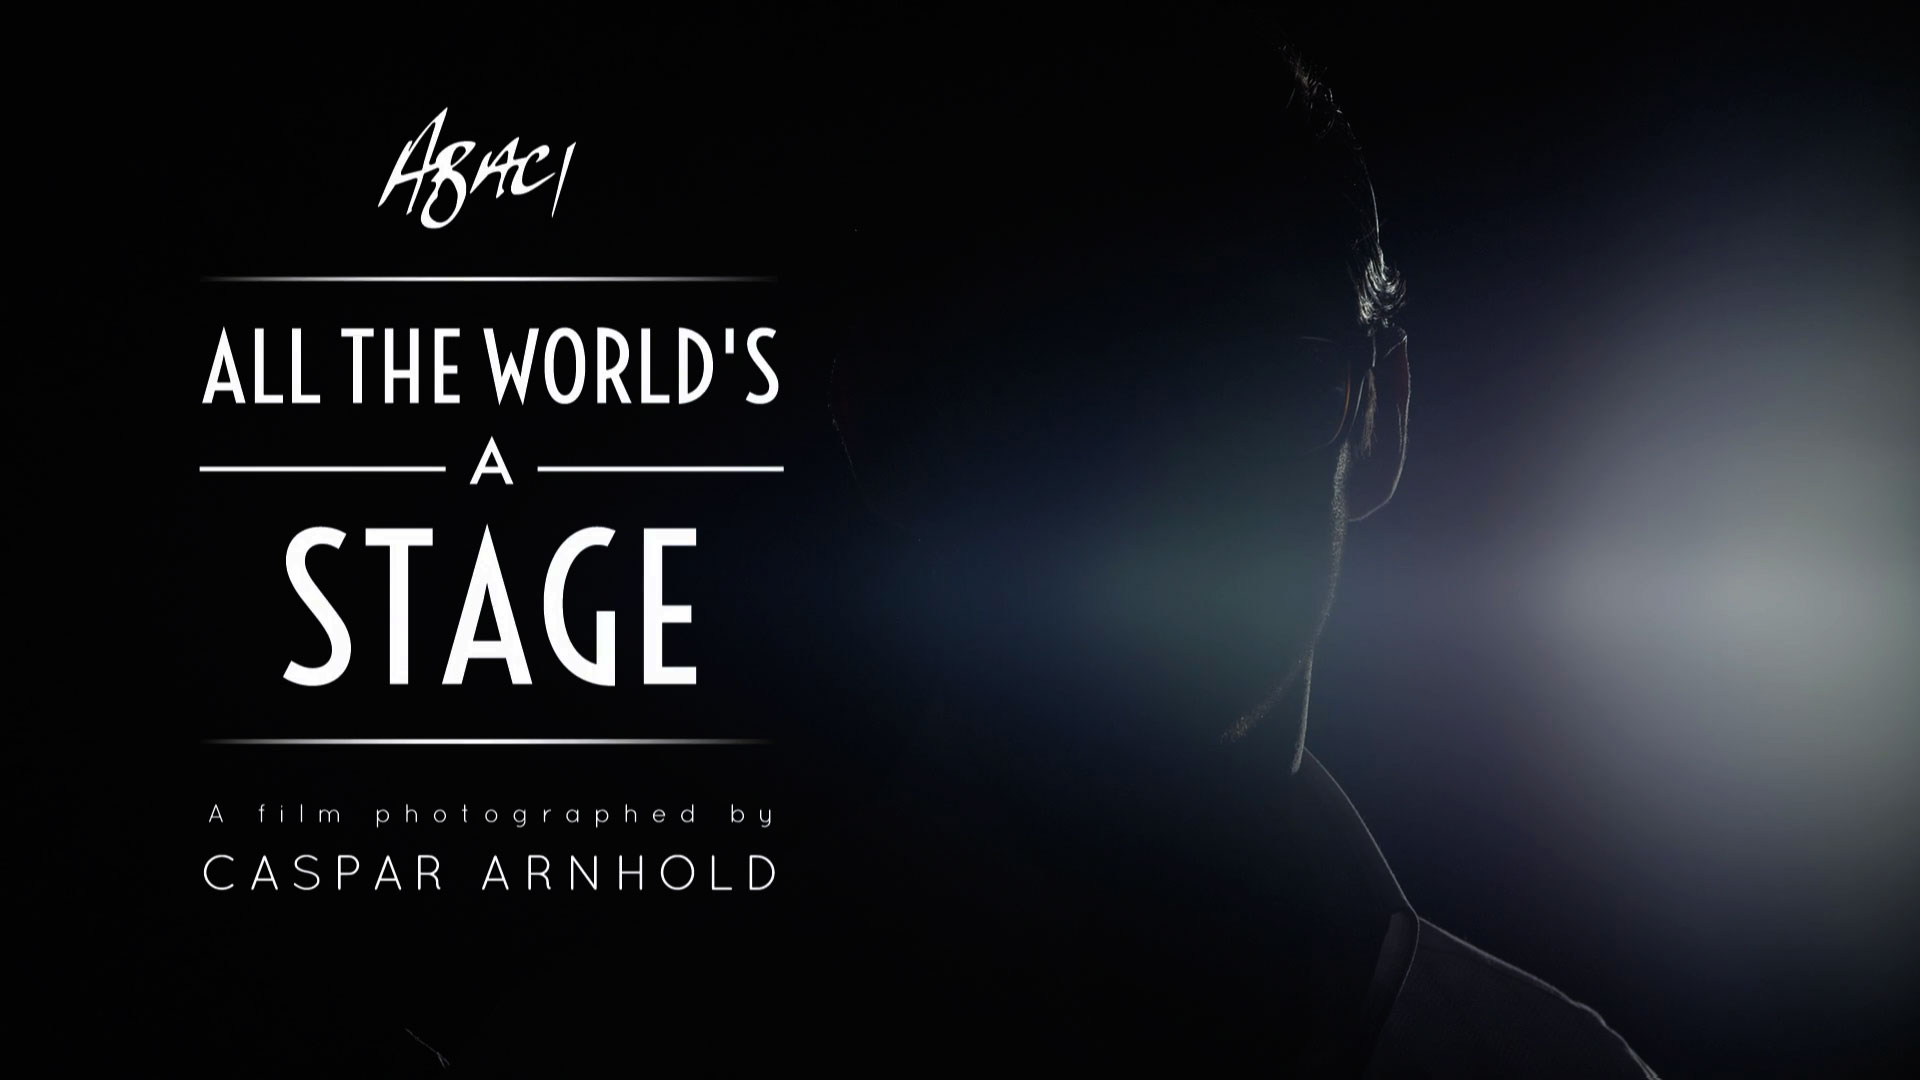 ABACI – All the world’s a stage